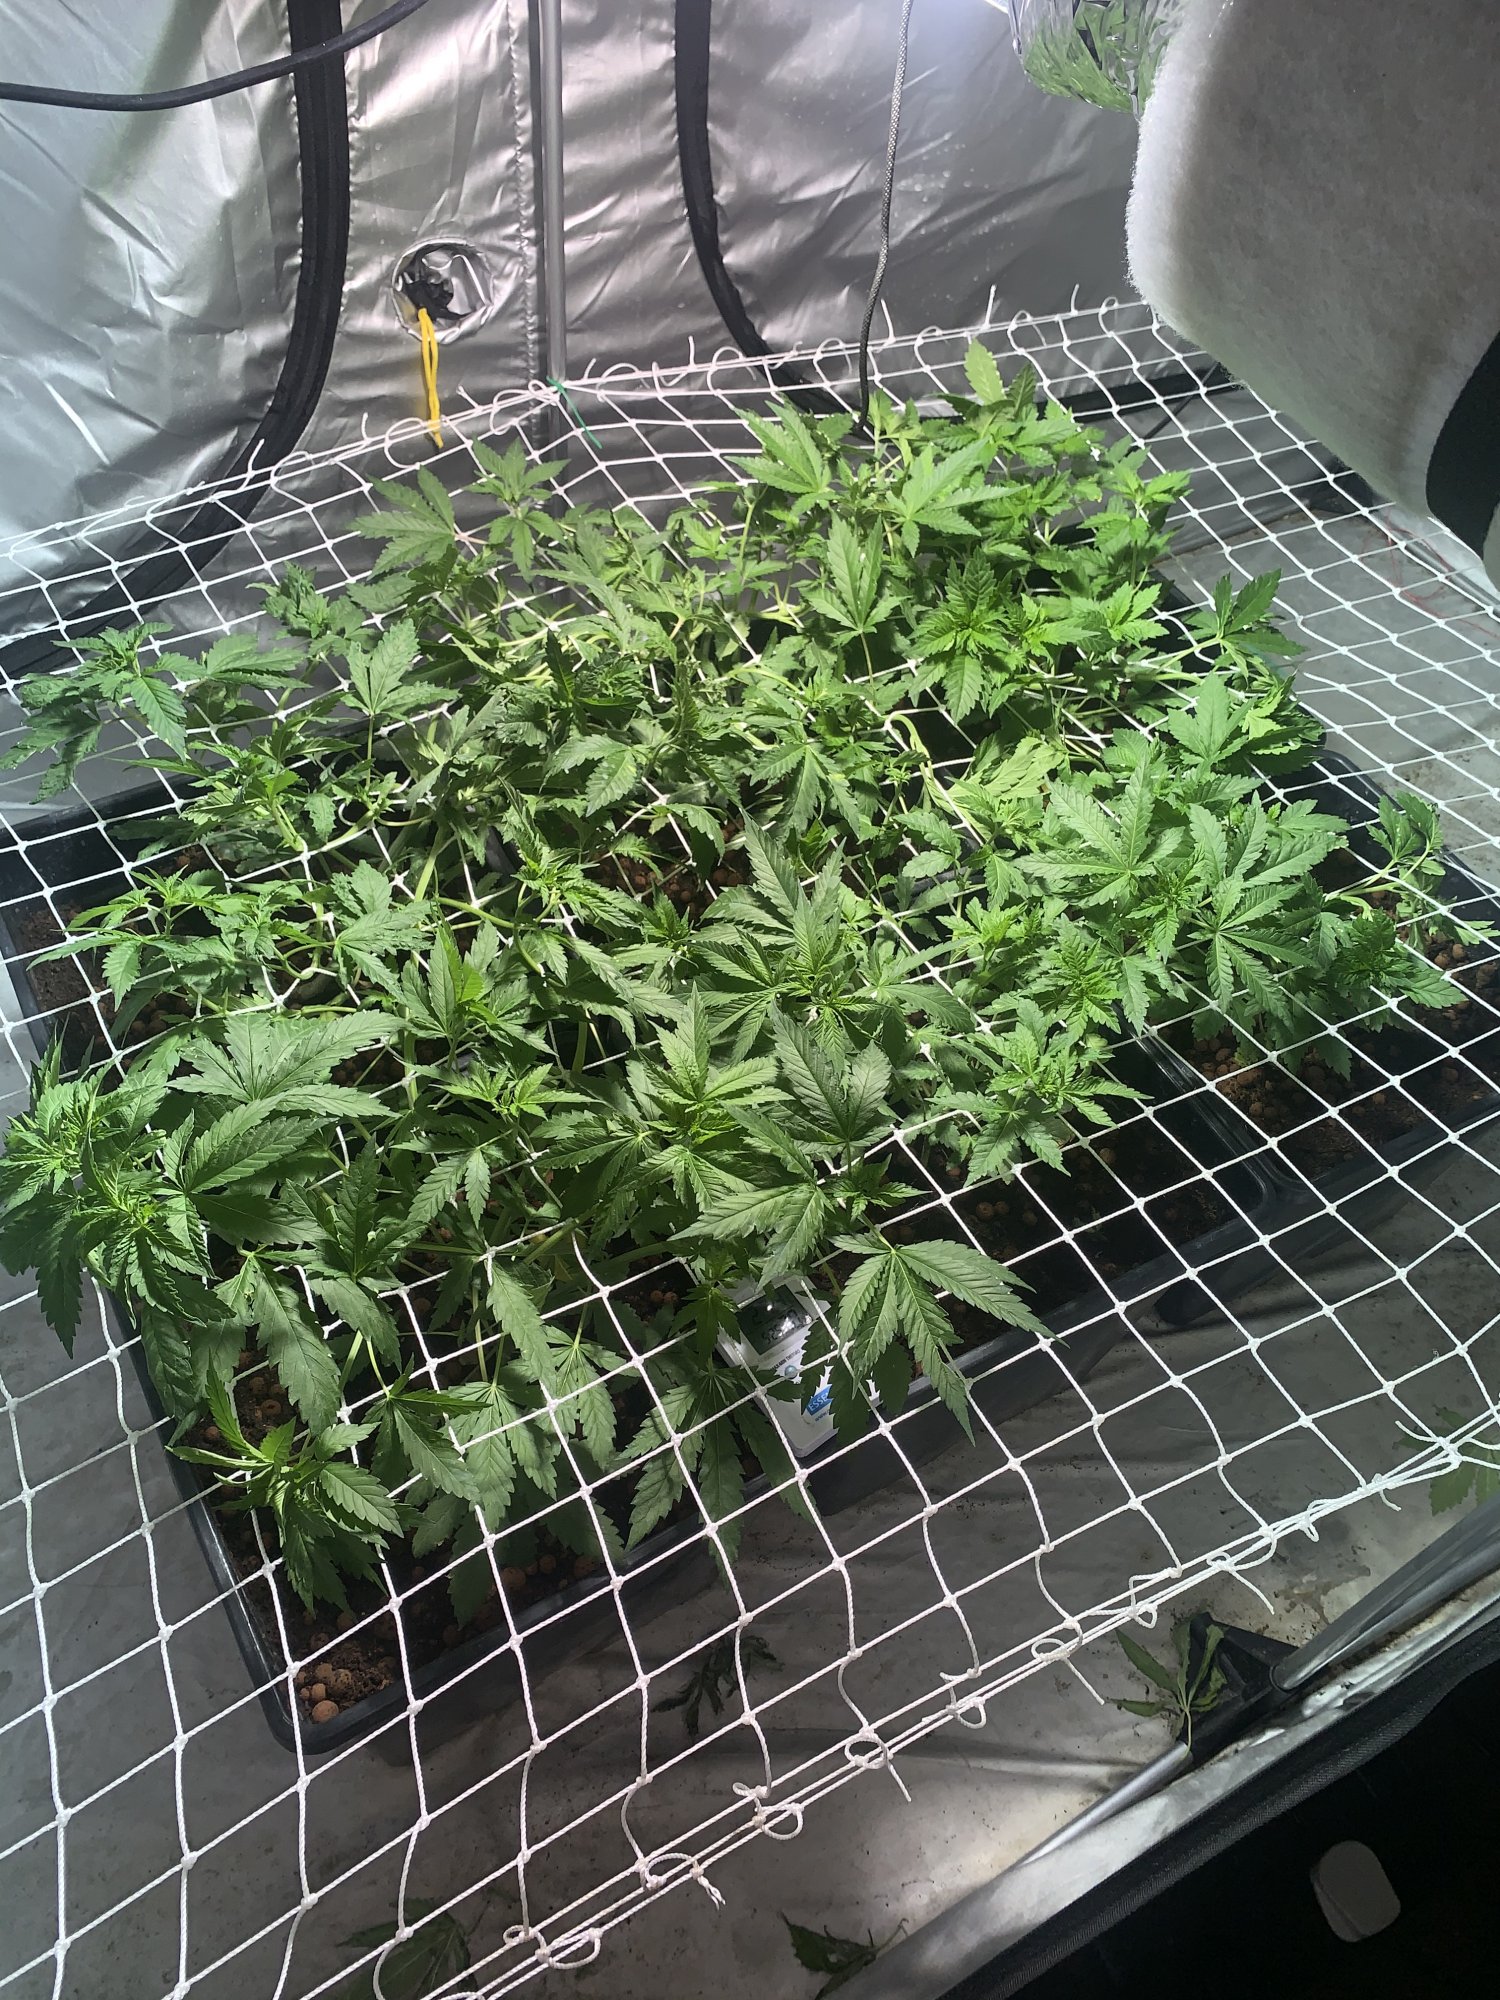 How far to fill the scrog